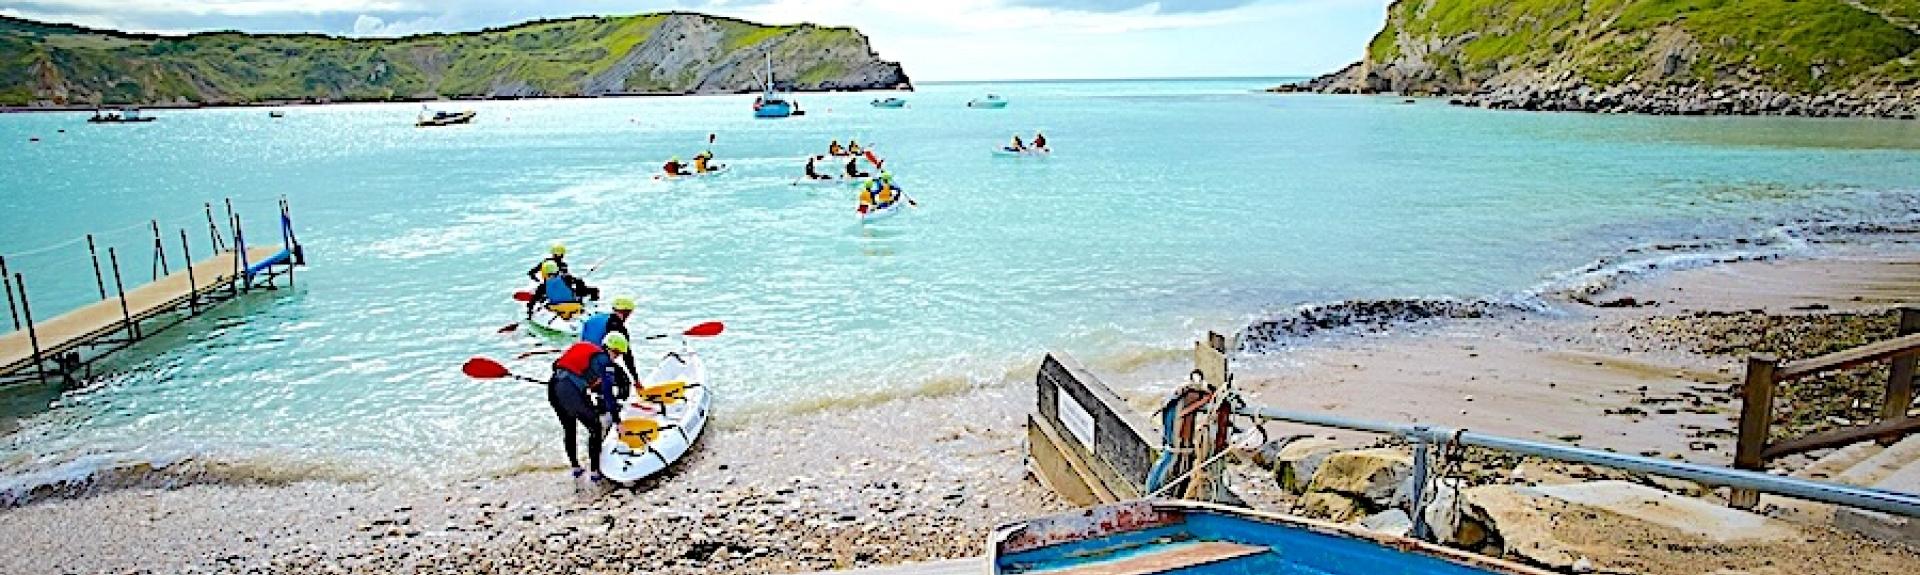 Kayaks paddle out to sea from a small Dorset beach on which a small wooden boat is anchored.